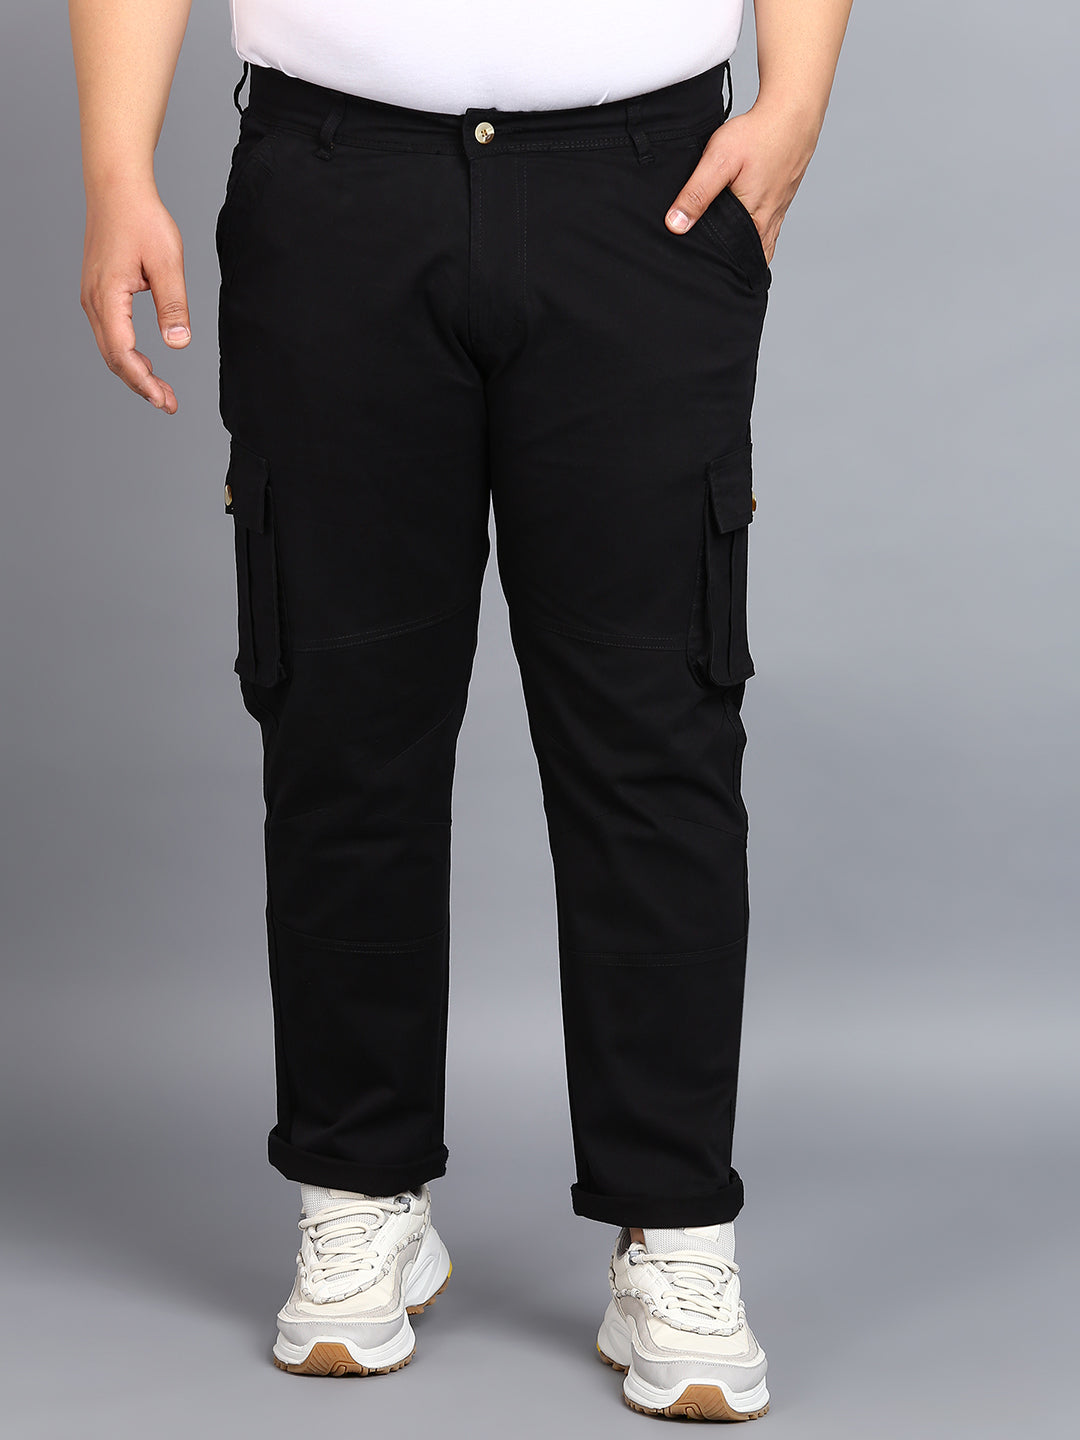 Urbano Plus Men's Black Regular Fit Solid Cargo Chino Pant with 6 Pockets